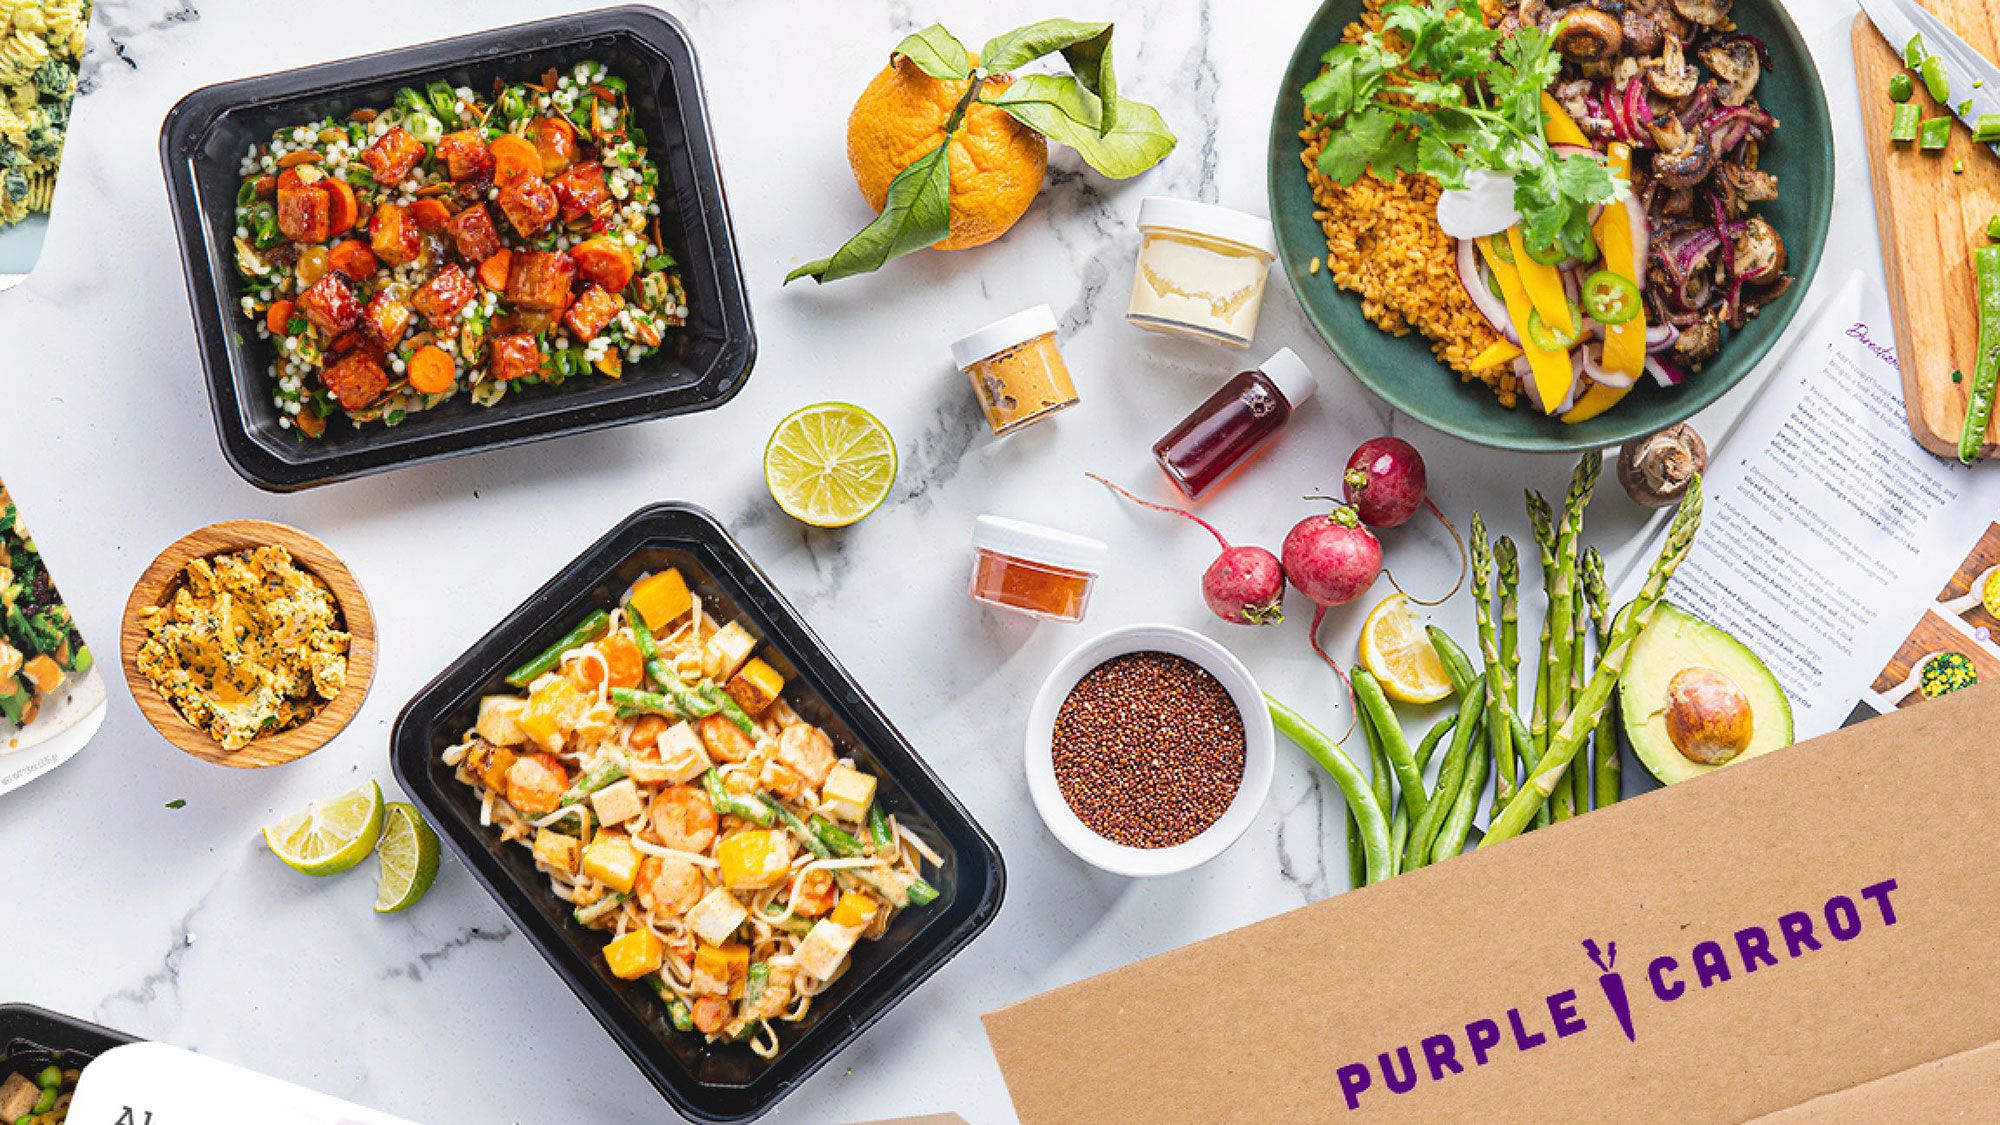 9 Healthy Meal Delivery Services So You Don't Have to Shop